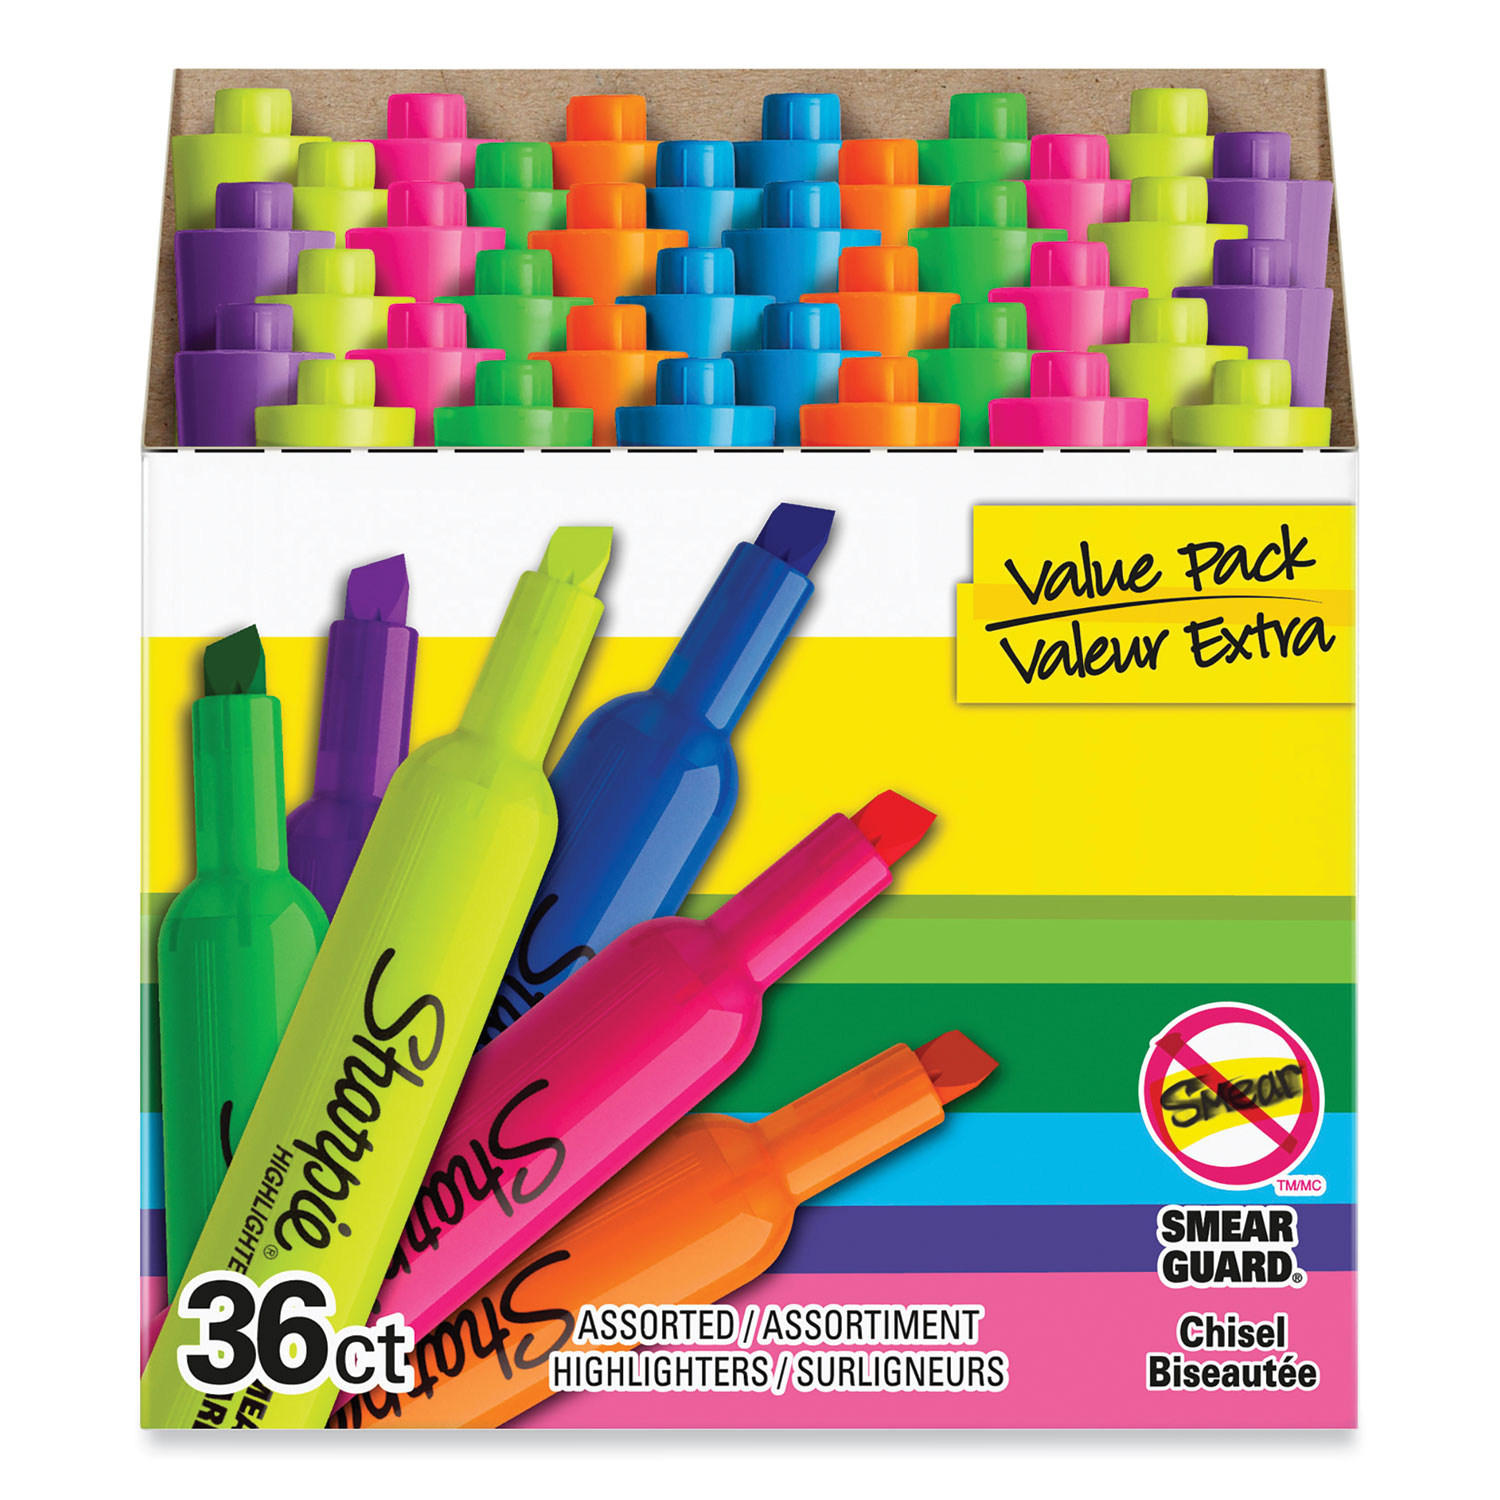 S-Note Creative Markers, Highlighters, Assorted Colors, Chisel Tip, 36  Count